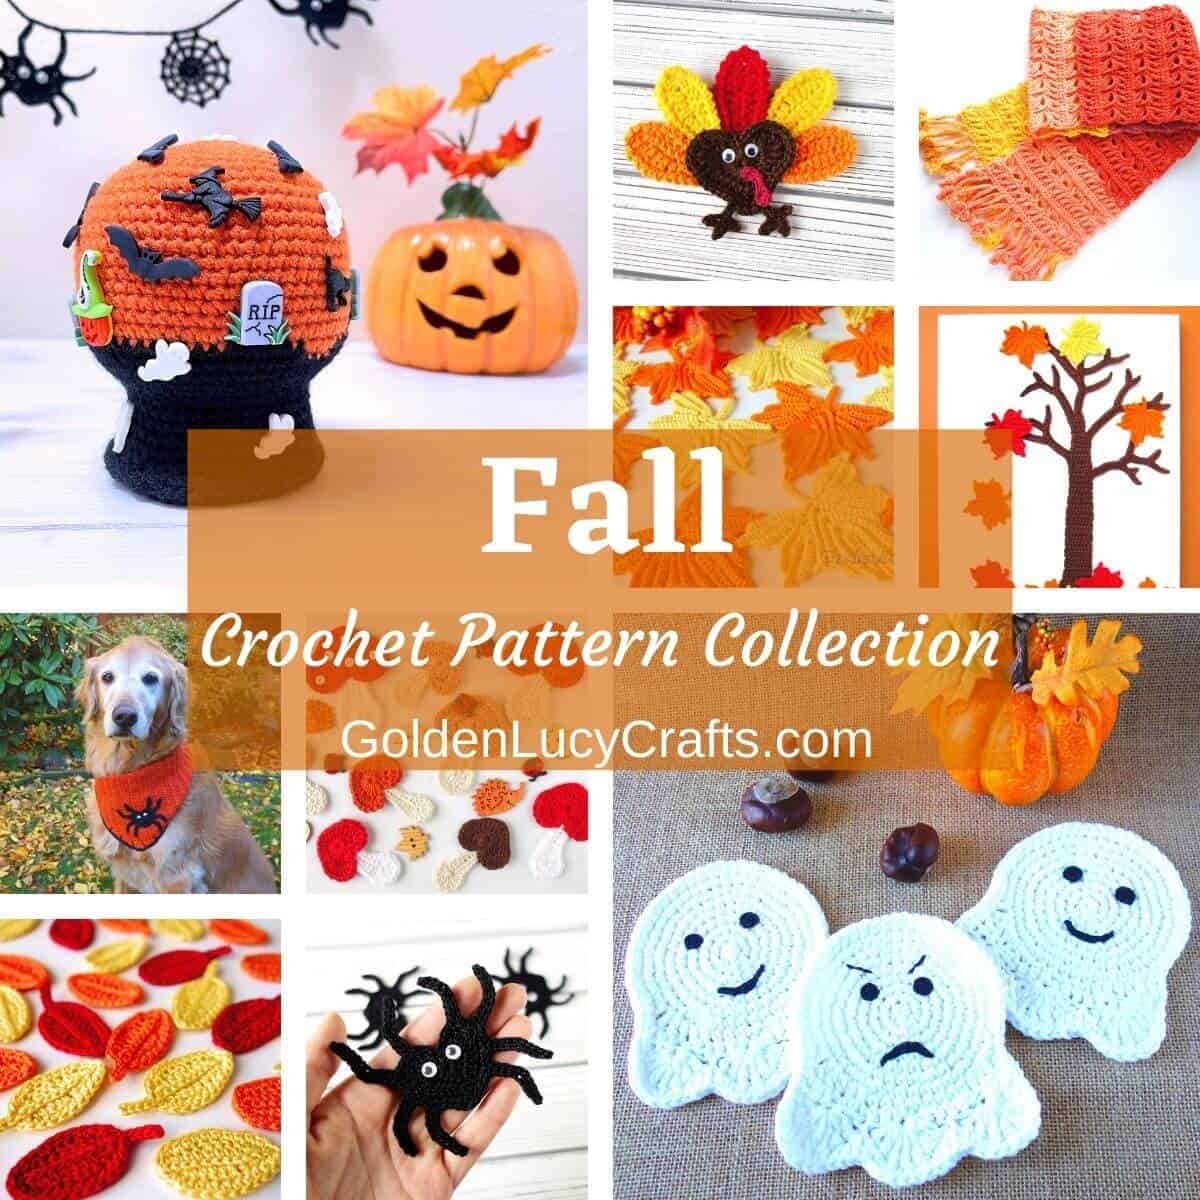 Photo collage of the Fall-themed crocheted items, overlay text saying Fall crochet pattern collection goldenlucycrafts.com.